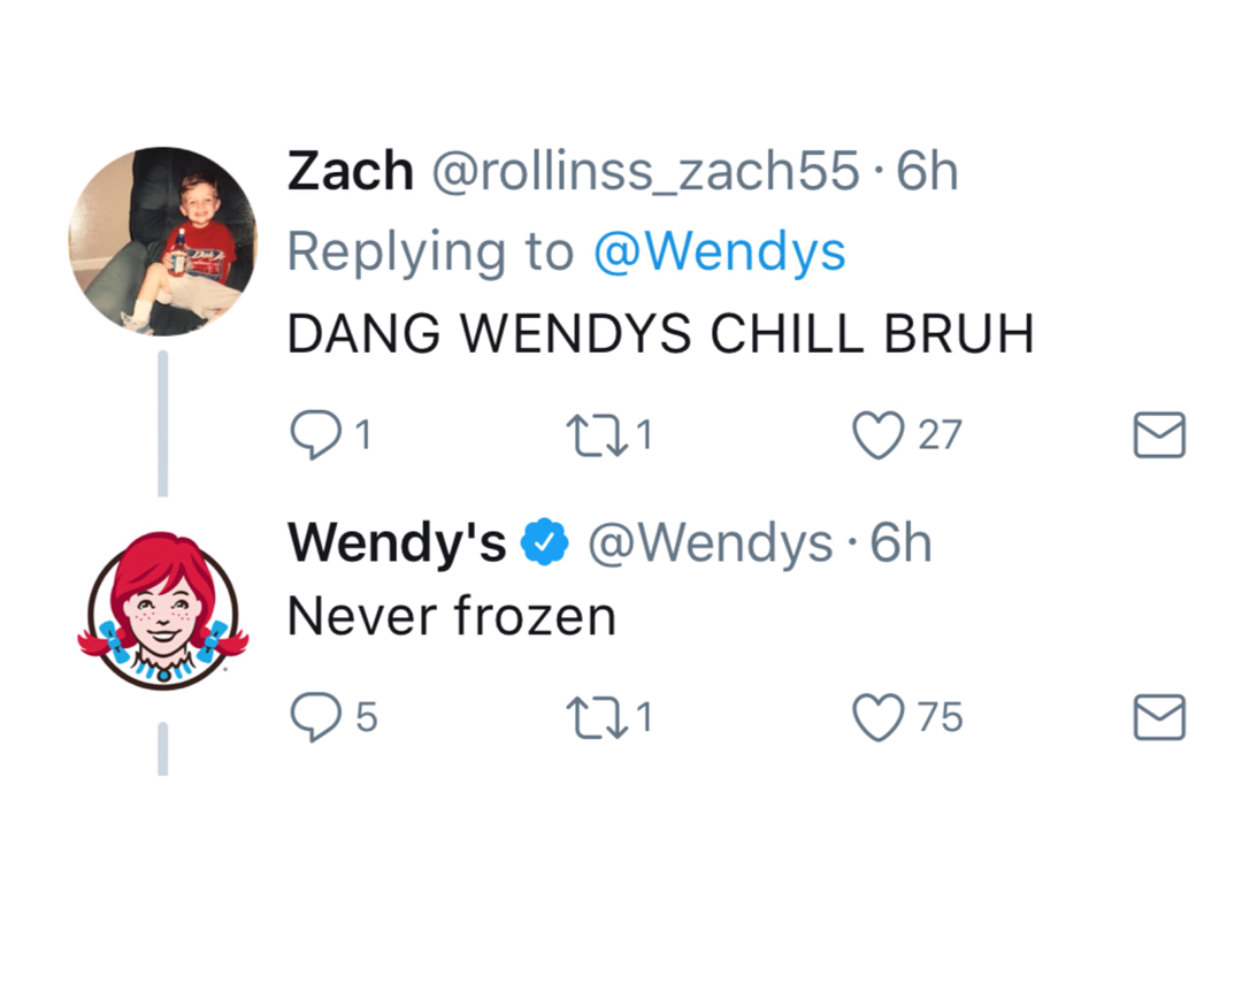 wendys roast - Zach .6h Dang Wendys Chill Bruh 91 271 27 Wendy's . 6h Never frozen 95 221 75